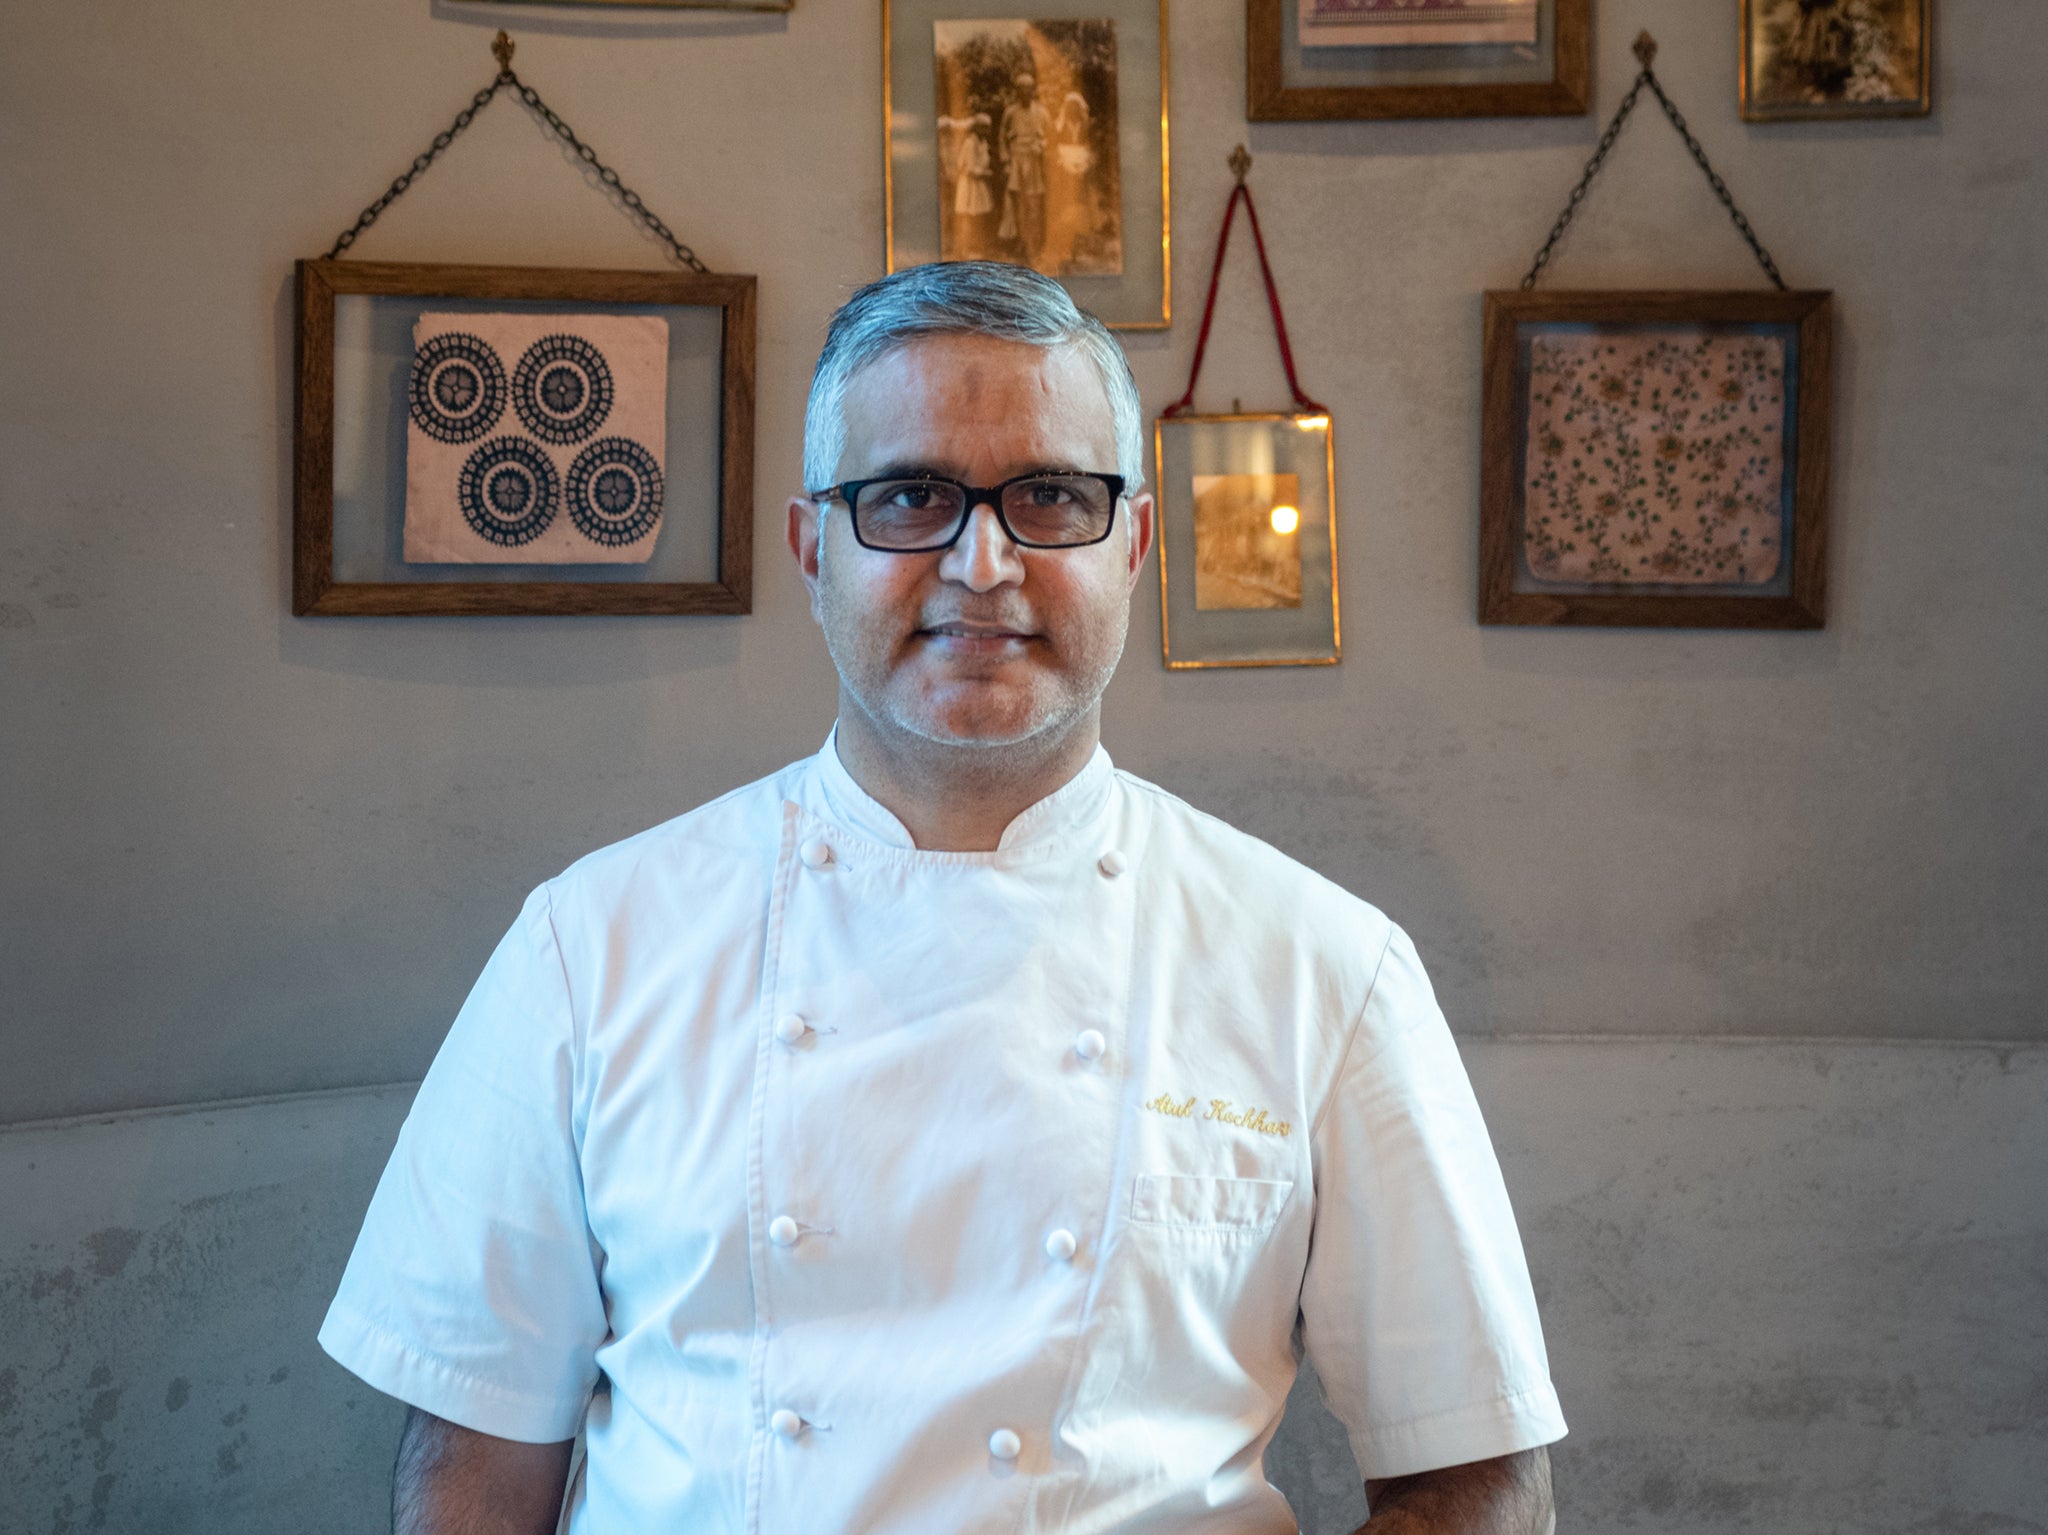 Kochhar was the first Indian chef to ever win a Michelin star, and is often credited with elevating Indian food to a fine dining level